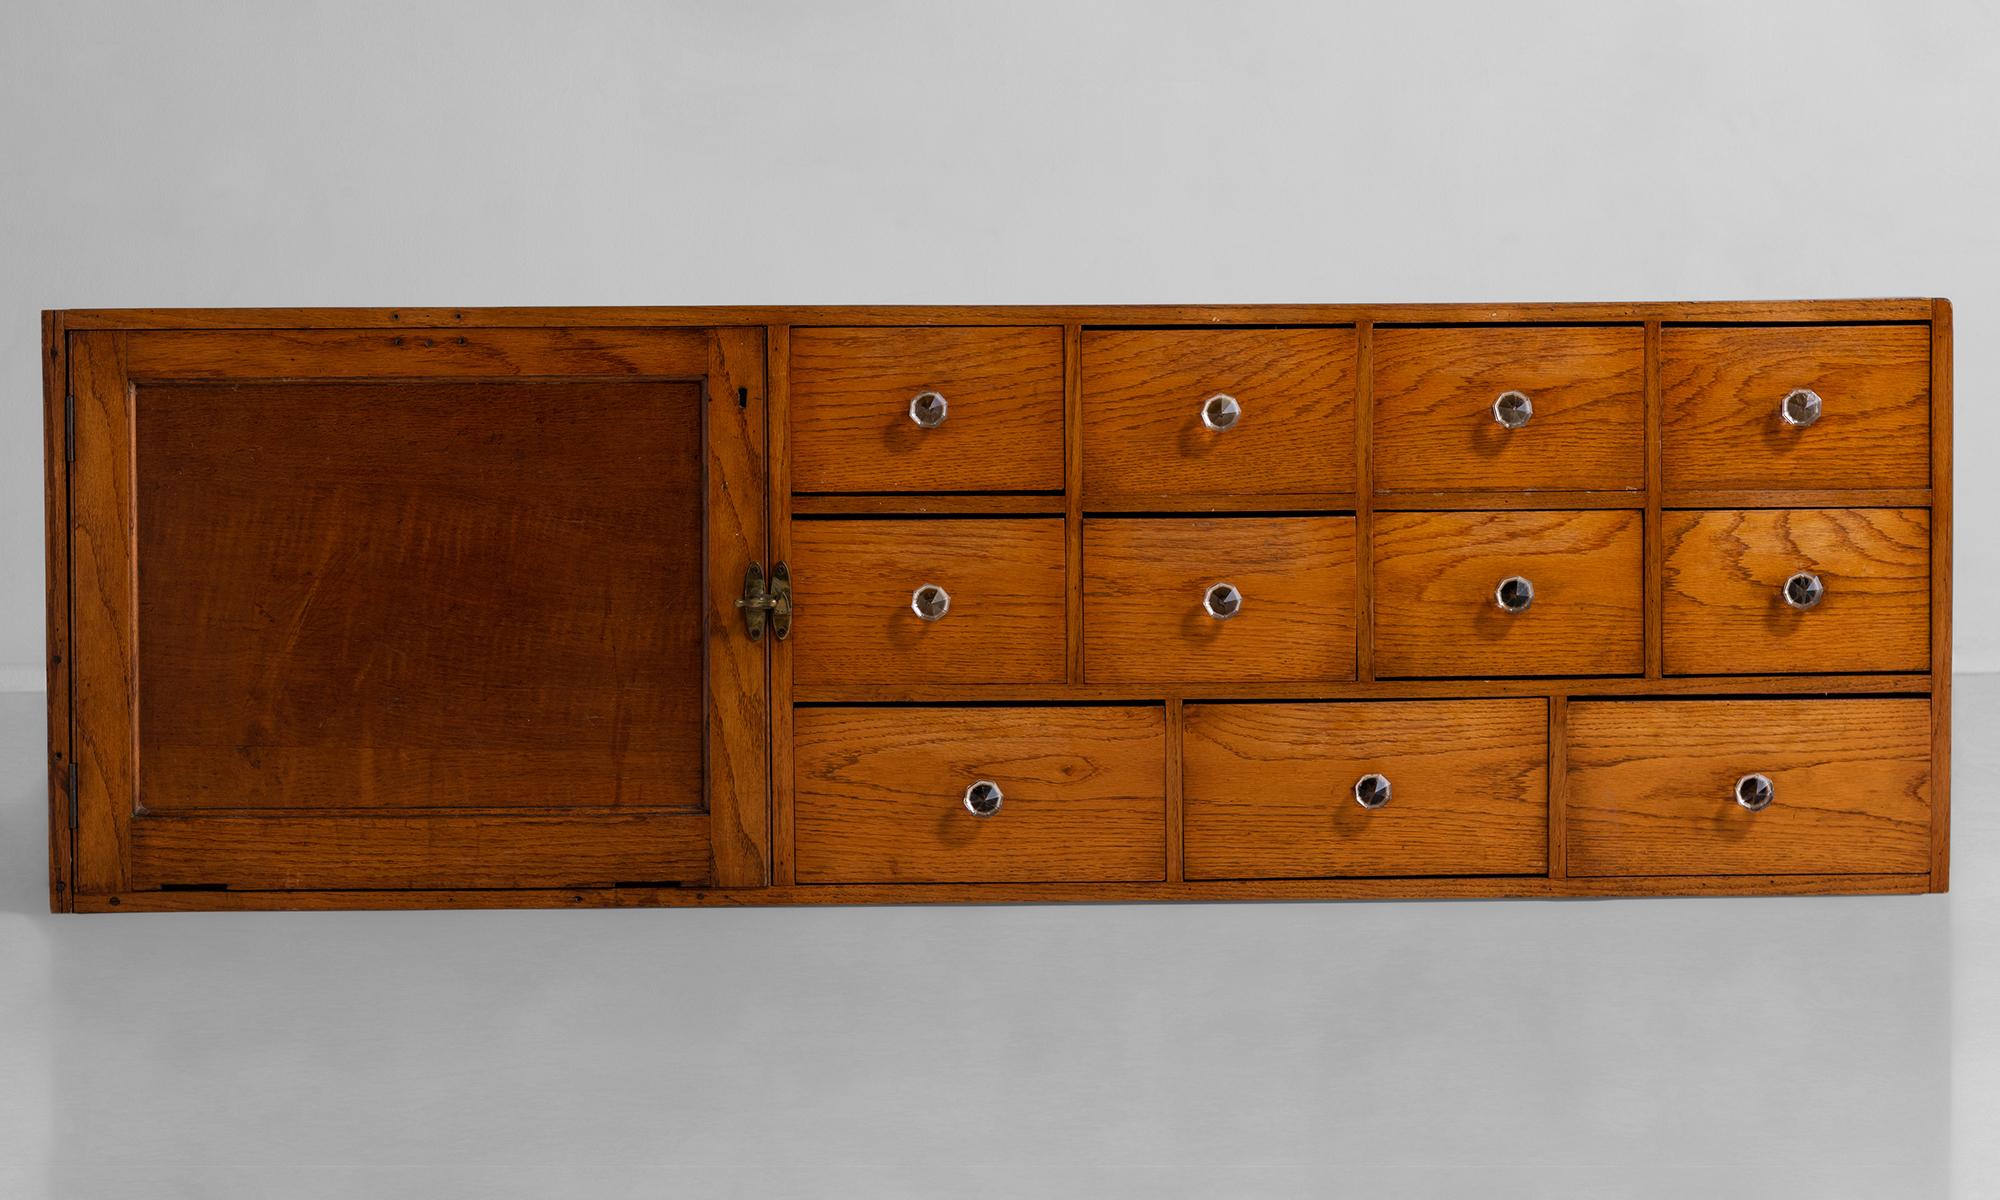 Oak fronted stacking cabinets with pine body, dovetailed drawers, original cut glass handles and ’T’ bar latches.



Measures: 60” W x 9” D x 27.5” H.
   